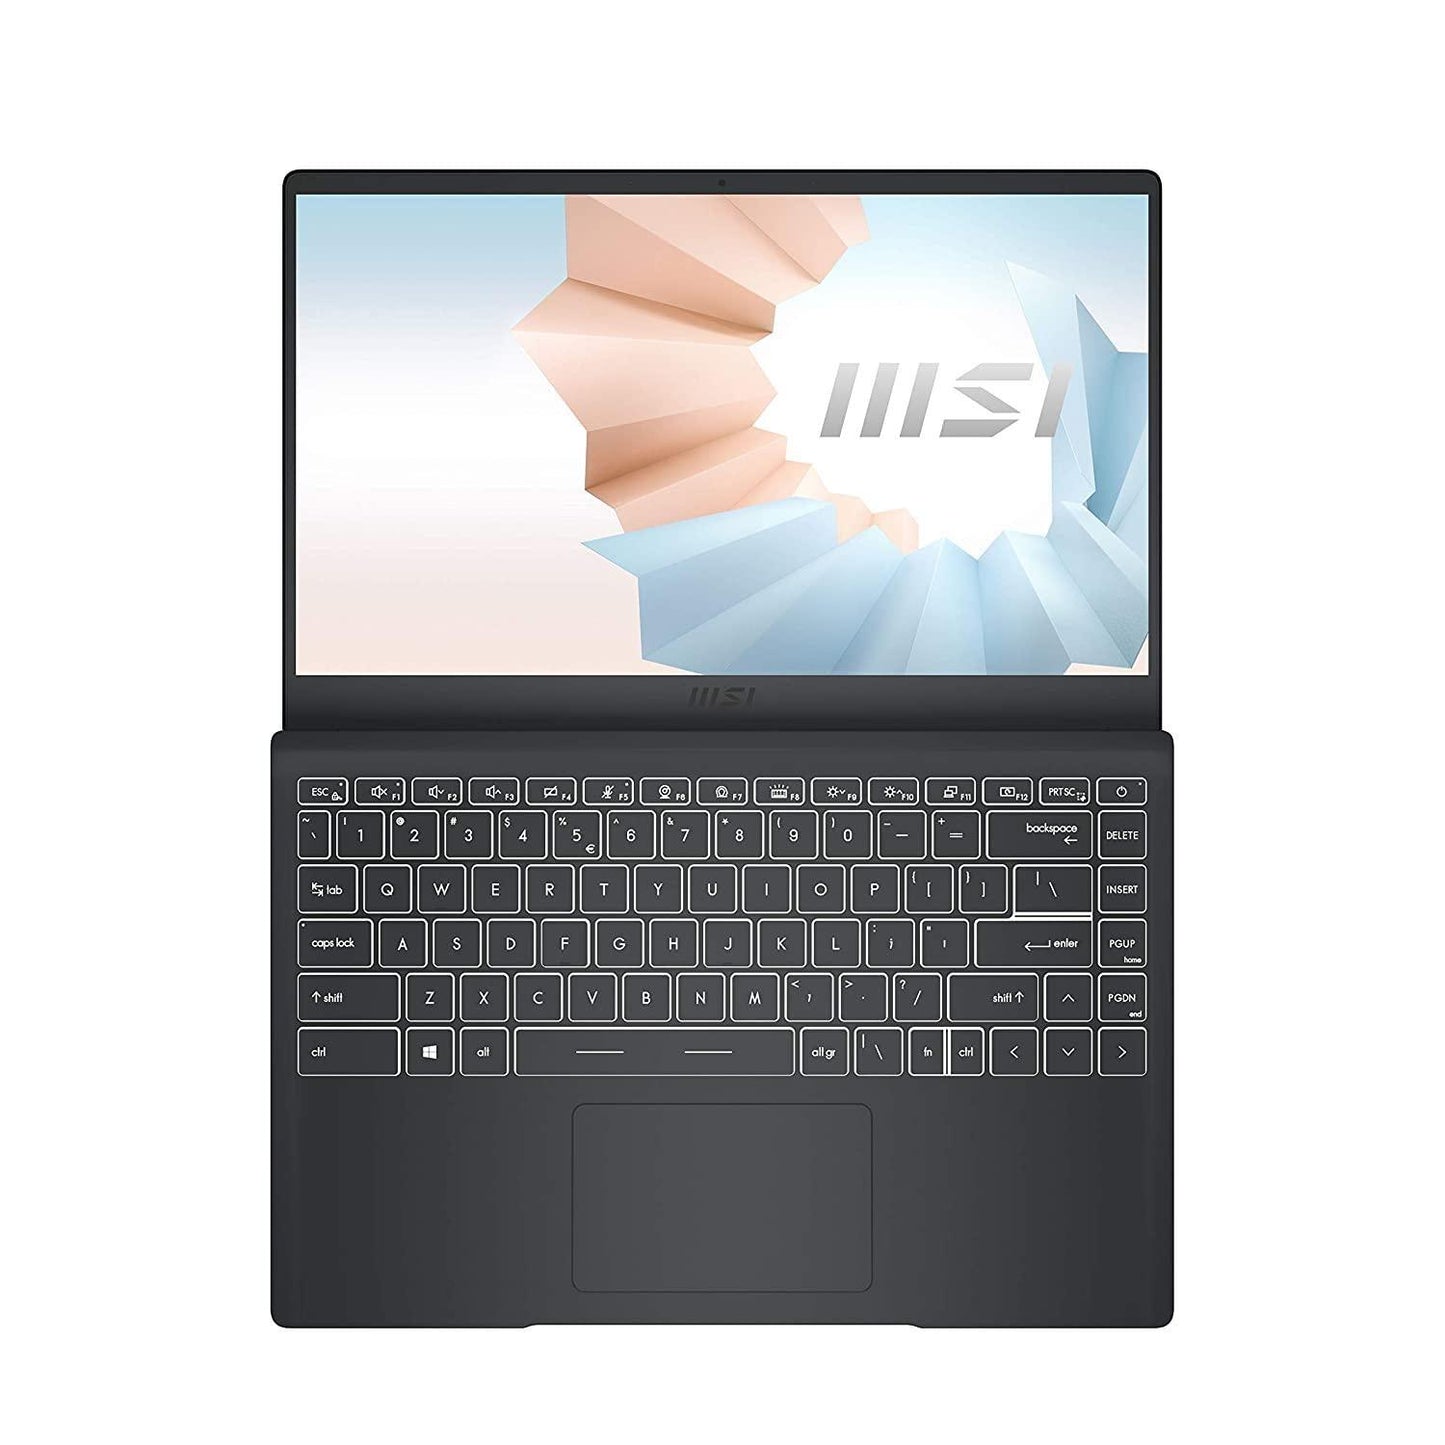 MSI Modern 14, Intel i5-10210U, 14" FHD IPS-Level 60Hz Panel Laptop (8GB/512GB NVMe SSD/Intel UHD Graphics/Carbon Grey), B10MW-639IN - Store For Gamers